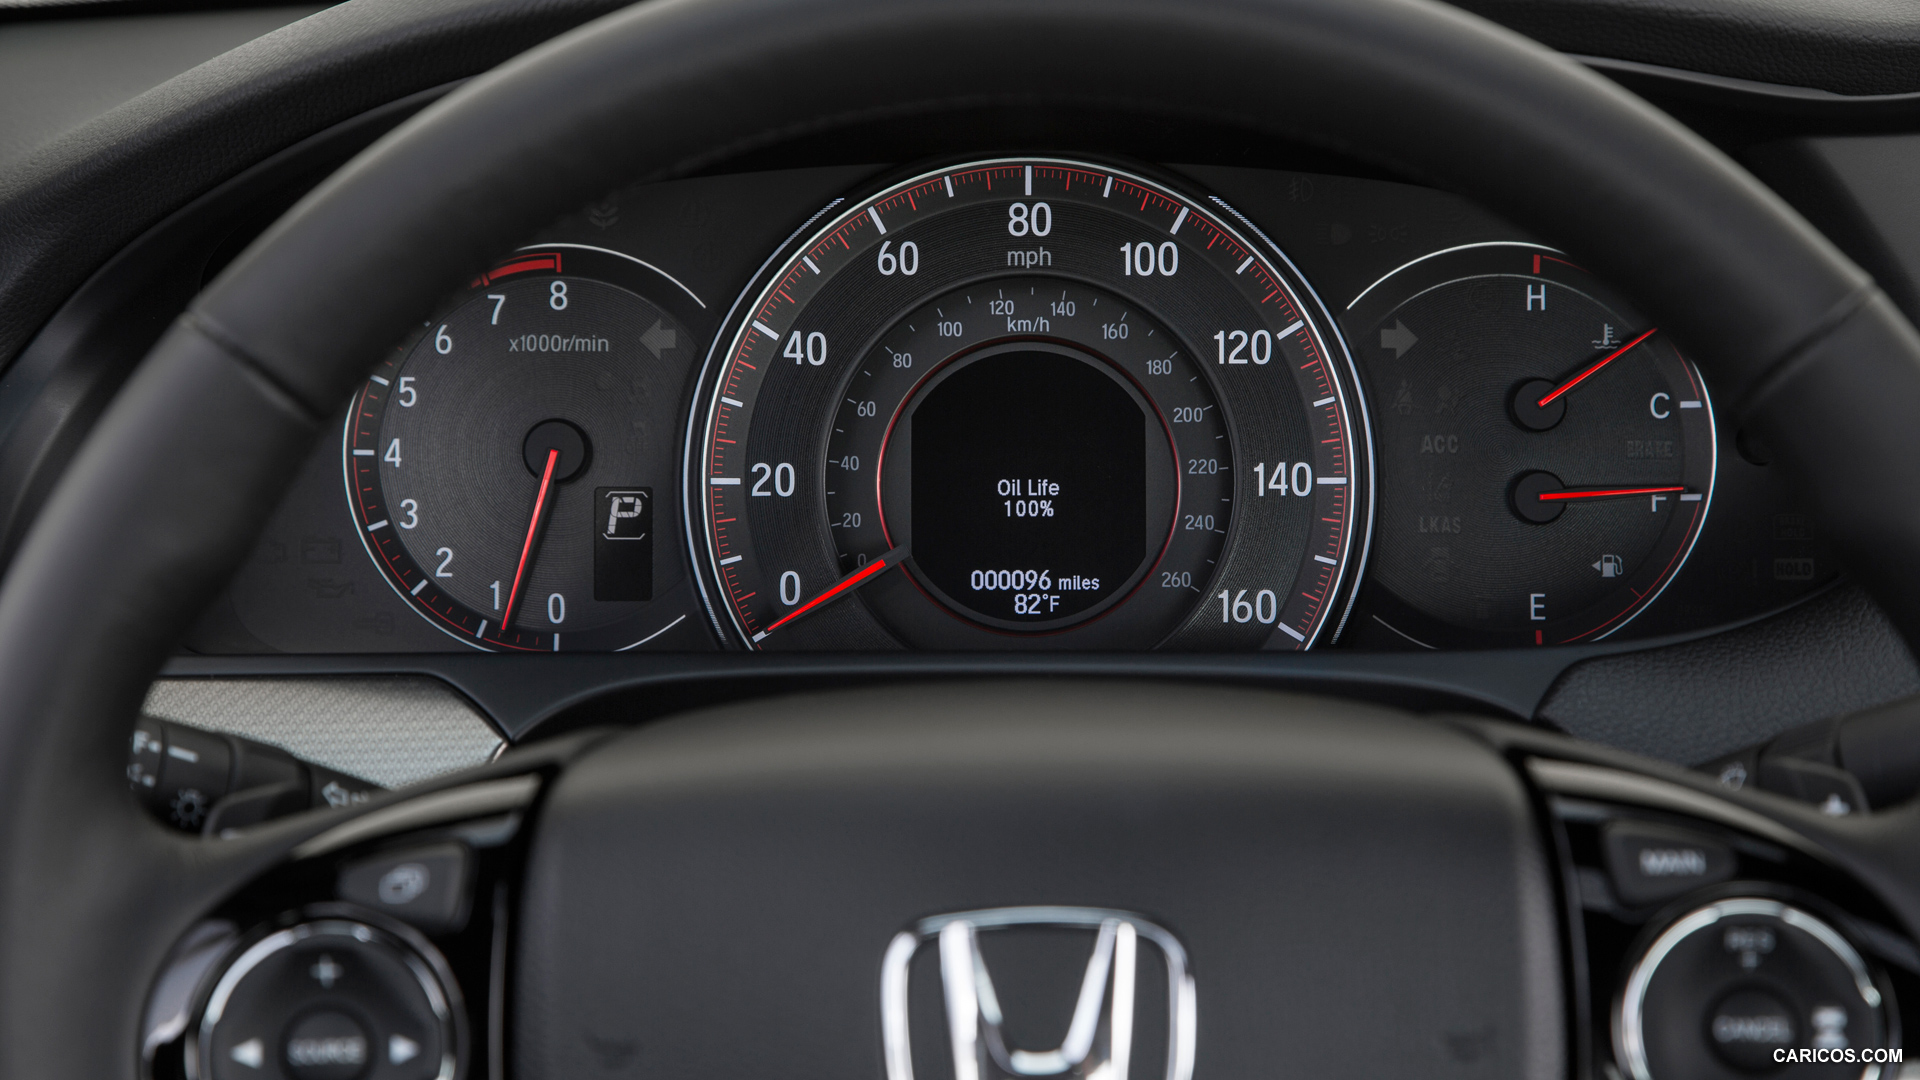 Honda Accord Coupe V6 Touring Instrument Cluster HD